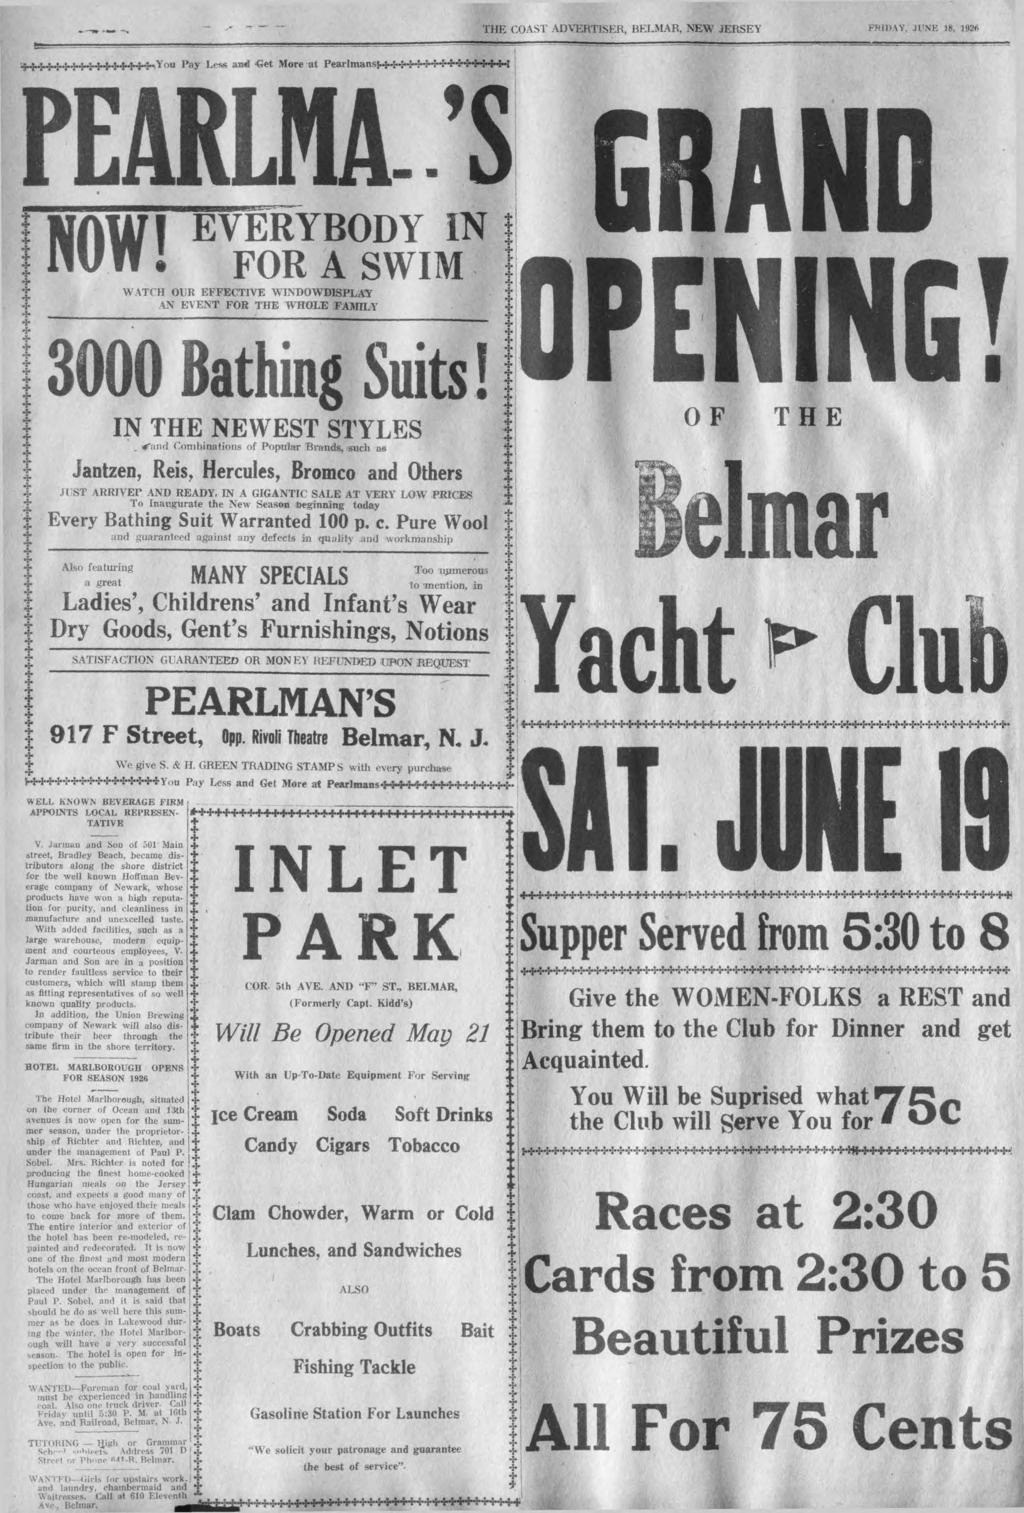 THE COAST ADVERTISER, RELMAR, NEW JERSEY FRIDAY, JUNE 18, 192K fou Pay Less and Ge More a P E A R L N A -. S % NOW!